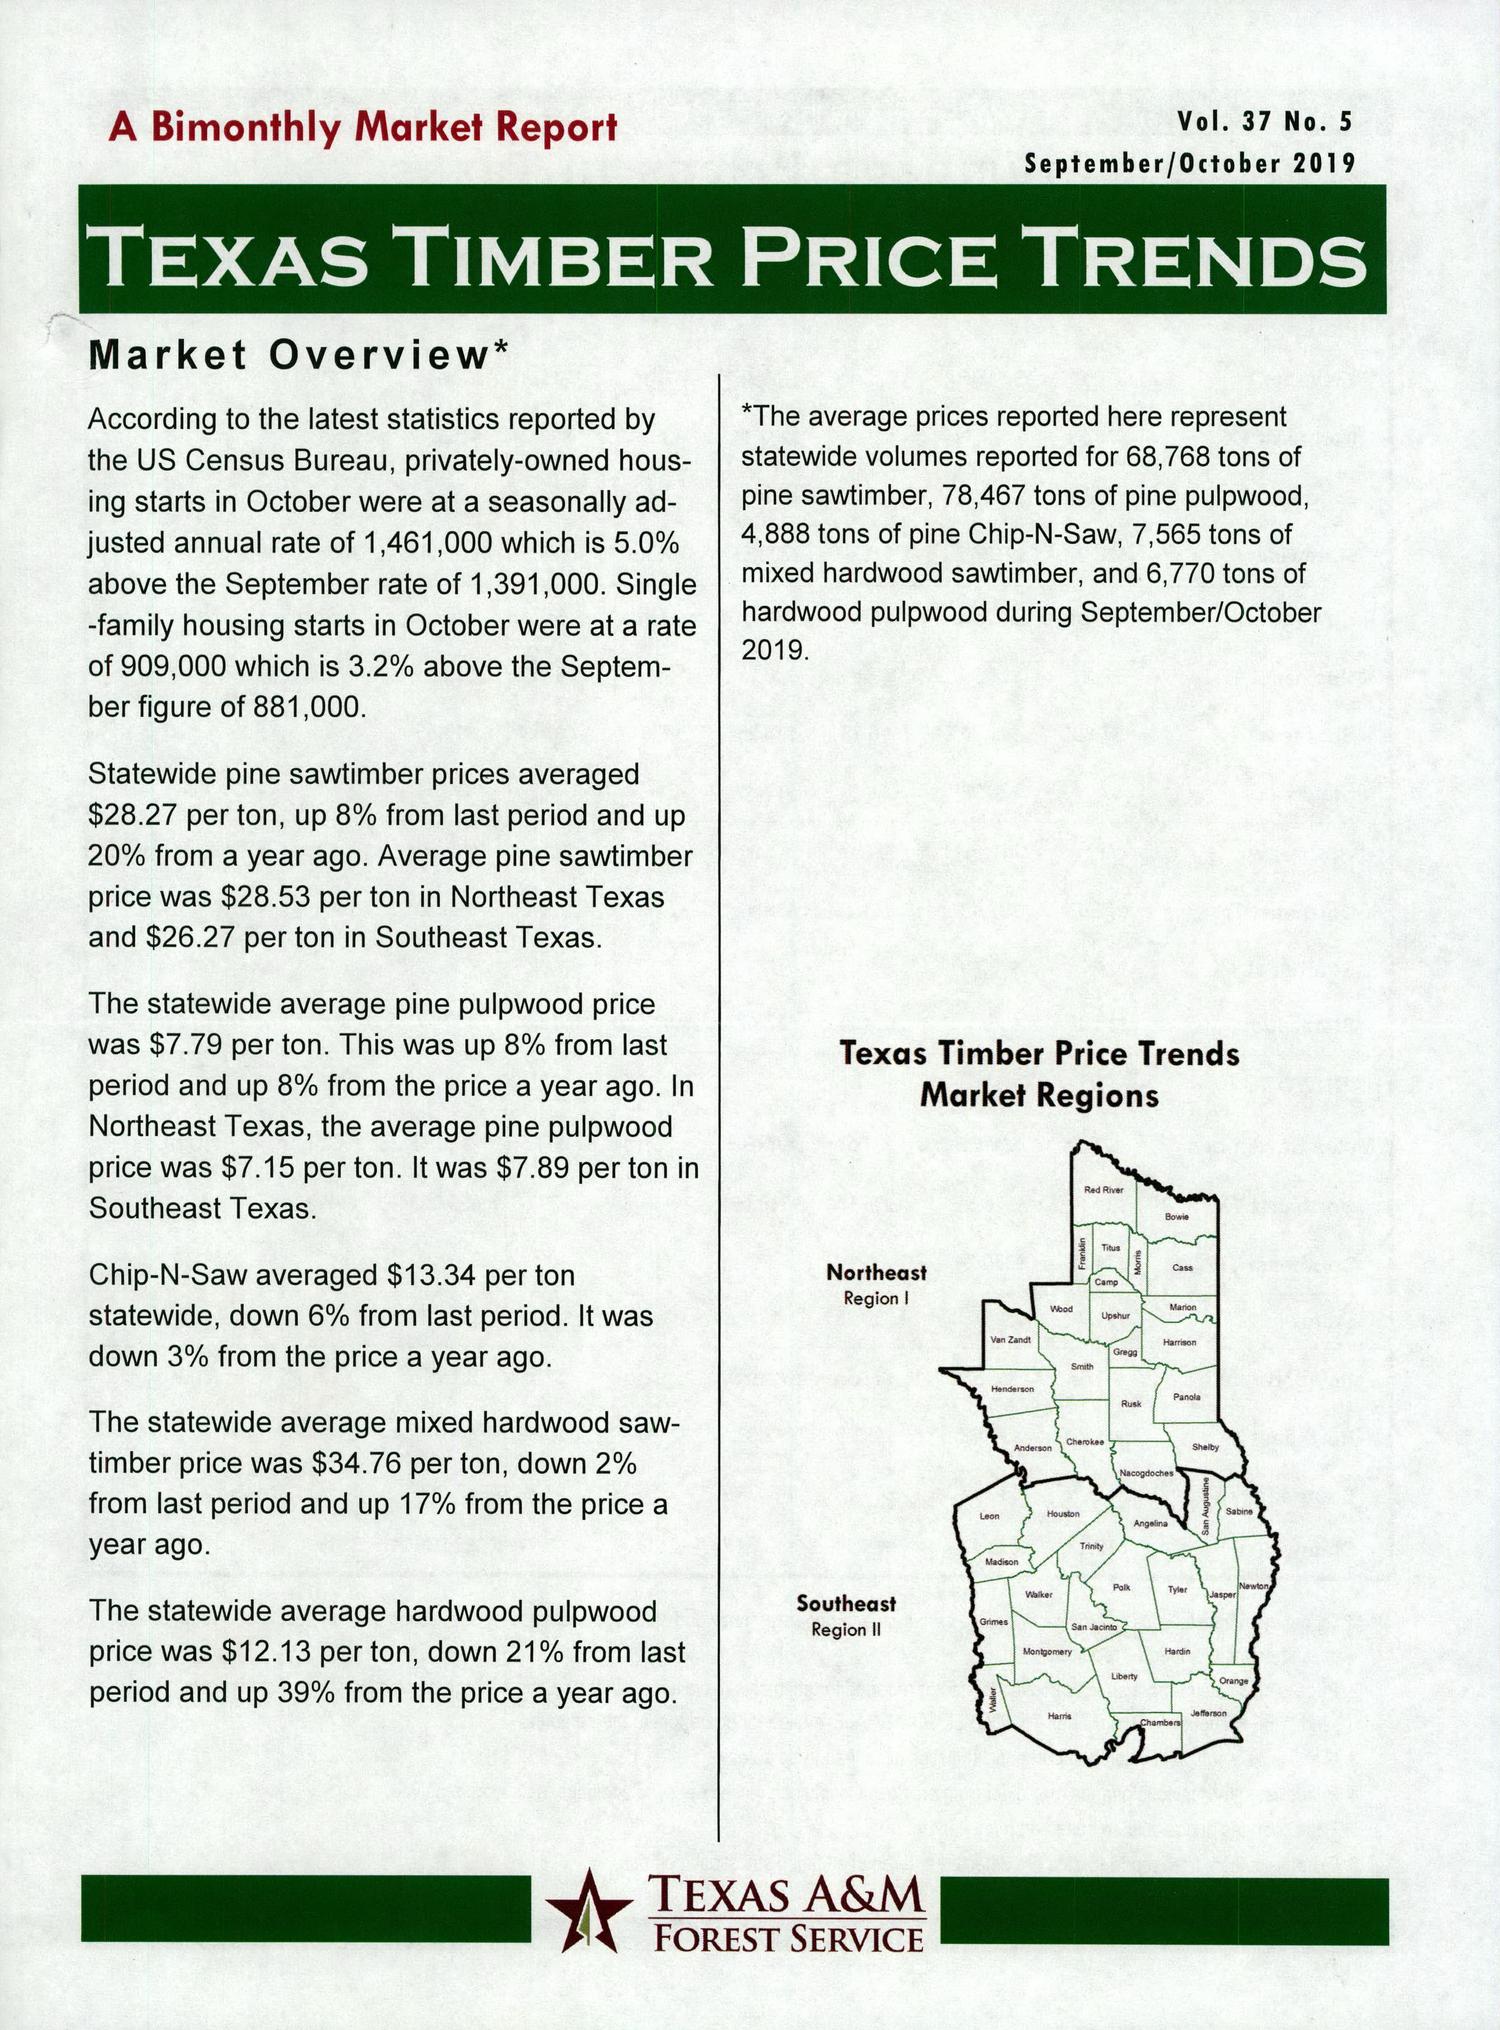 Texas Timber Price Trends, Volume 37, Number 5, September/October 2019
                                                
                                                    FRONT COVER
                                                